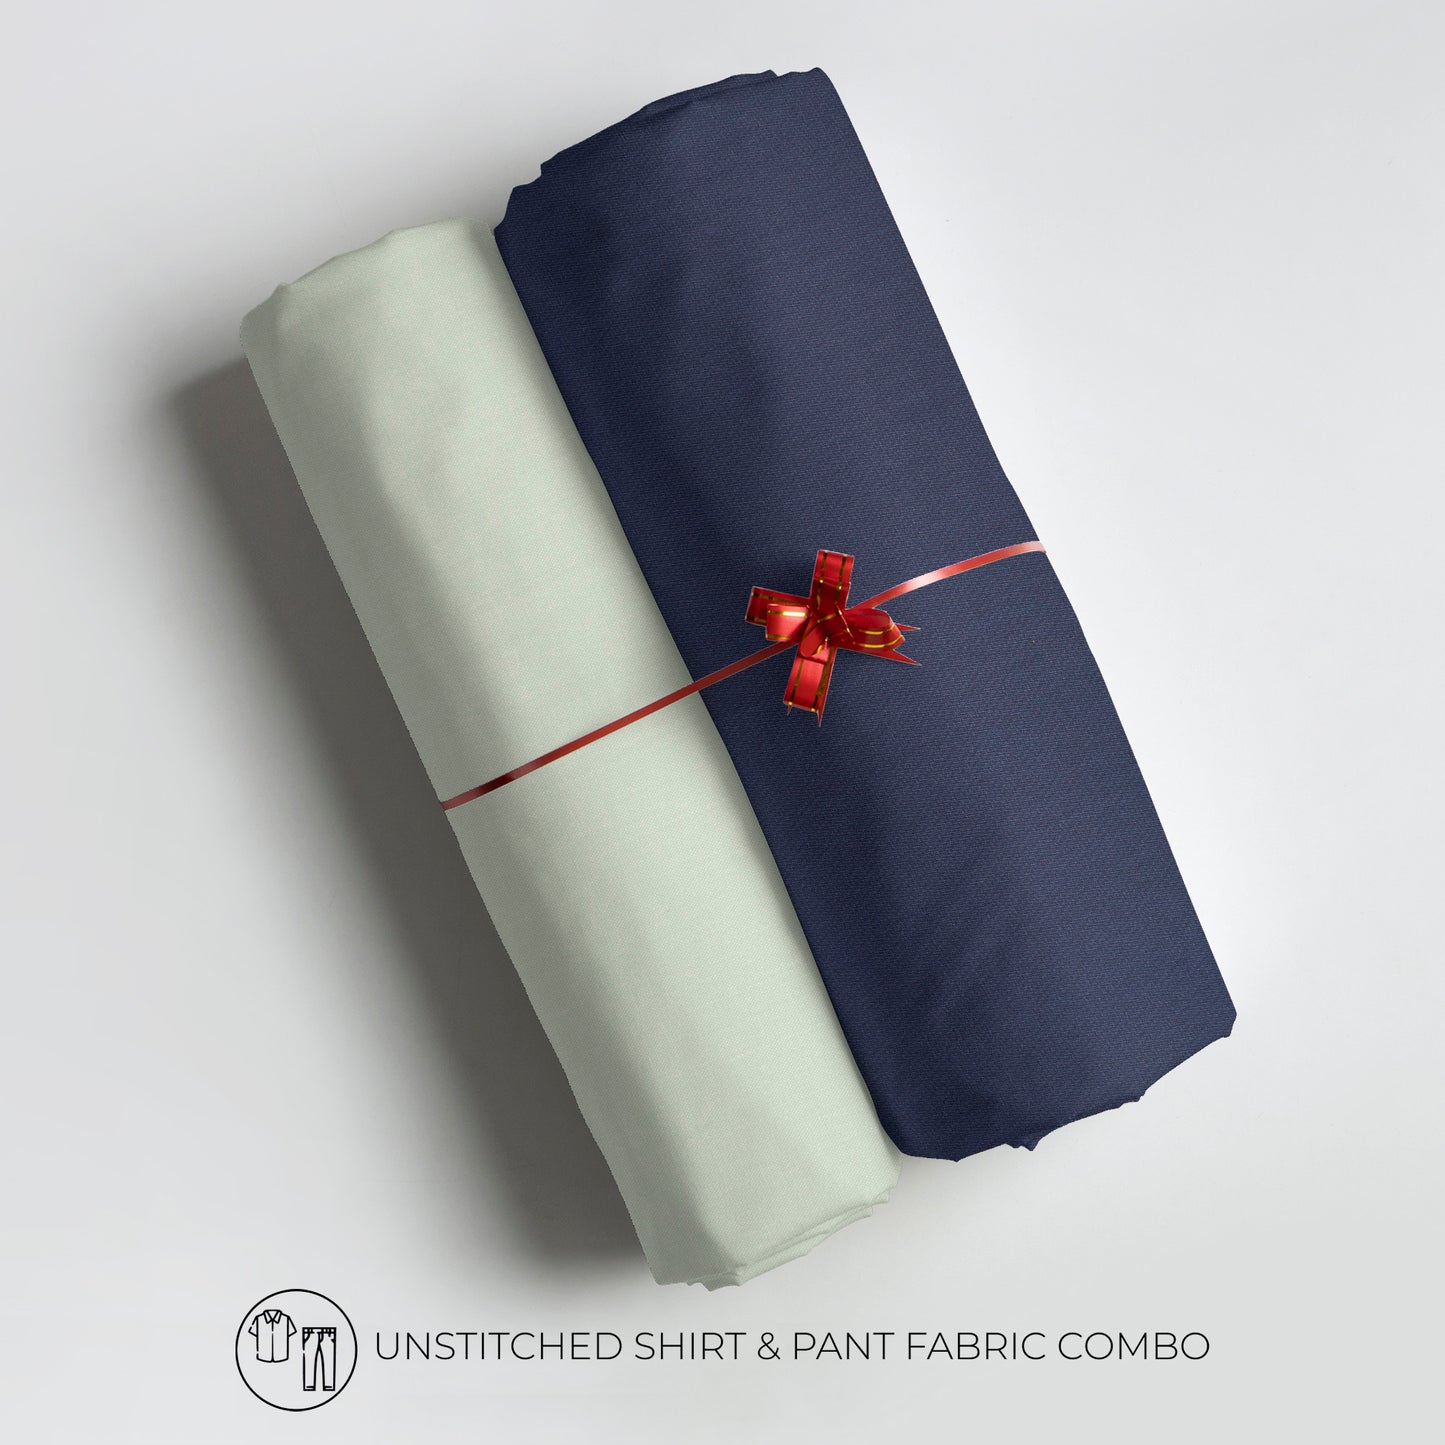 Men's Unstitched Shirt And Pant Fabric Combo In Gift Carrying Case